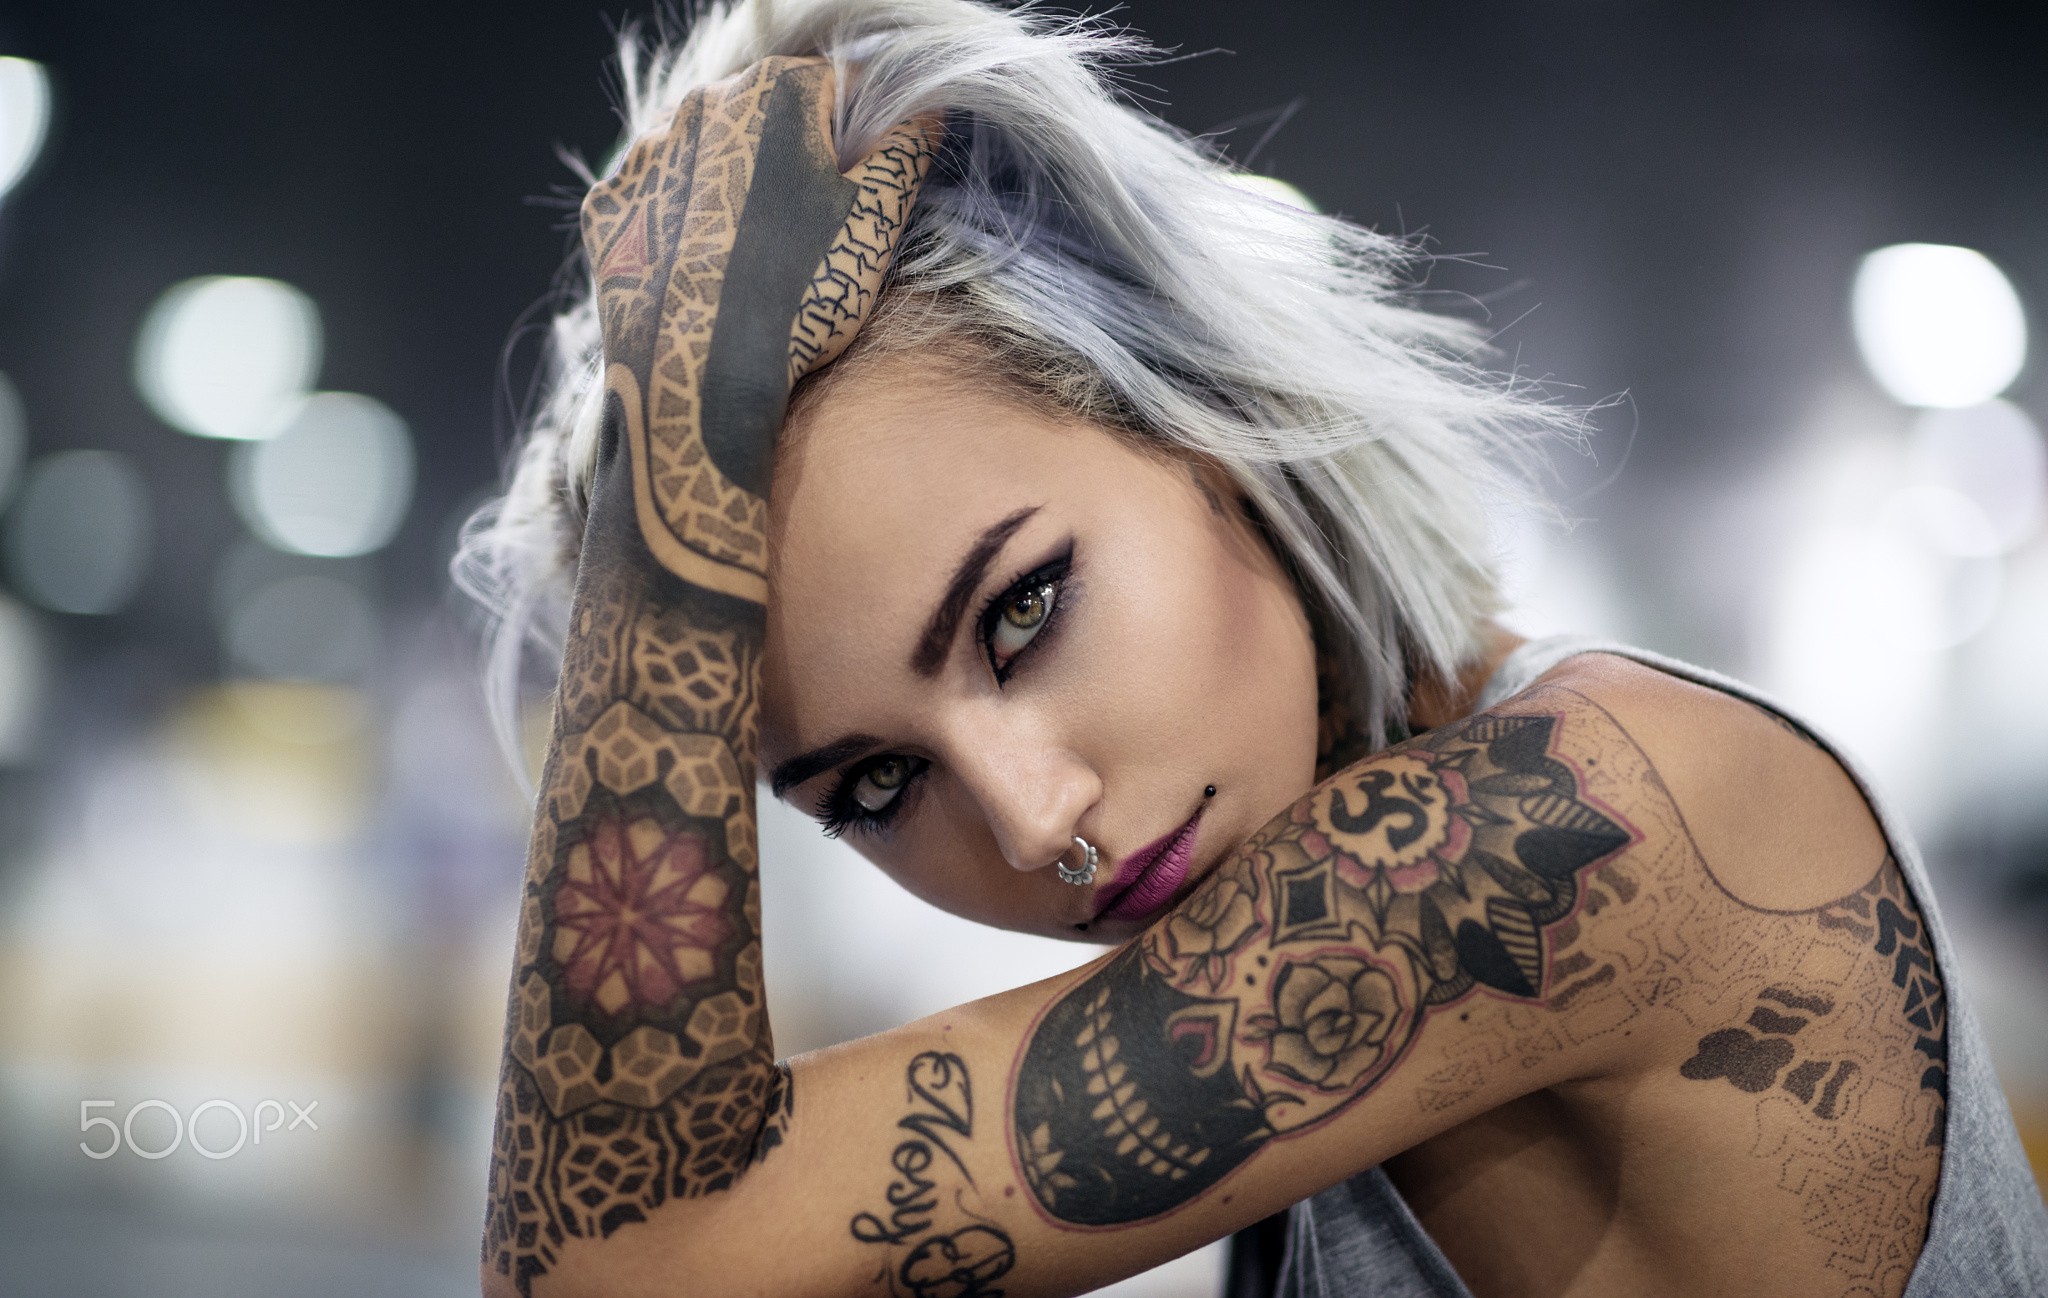 People 2048x1298 women face portrait dyed hair tattoo nose ring Fishball Suicide Luca Foscili watermarked 500px